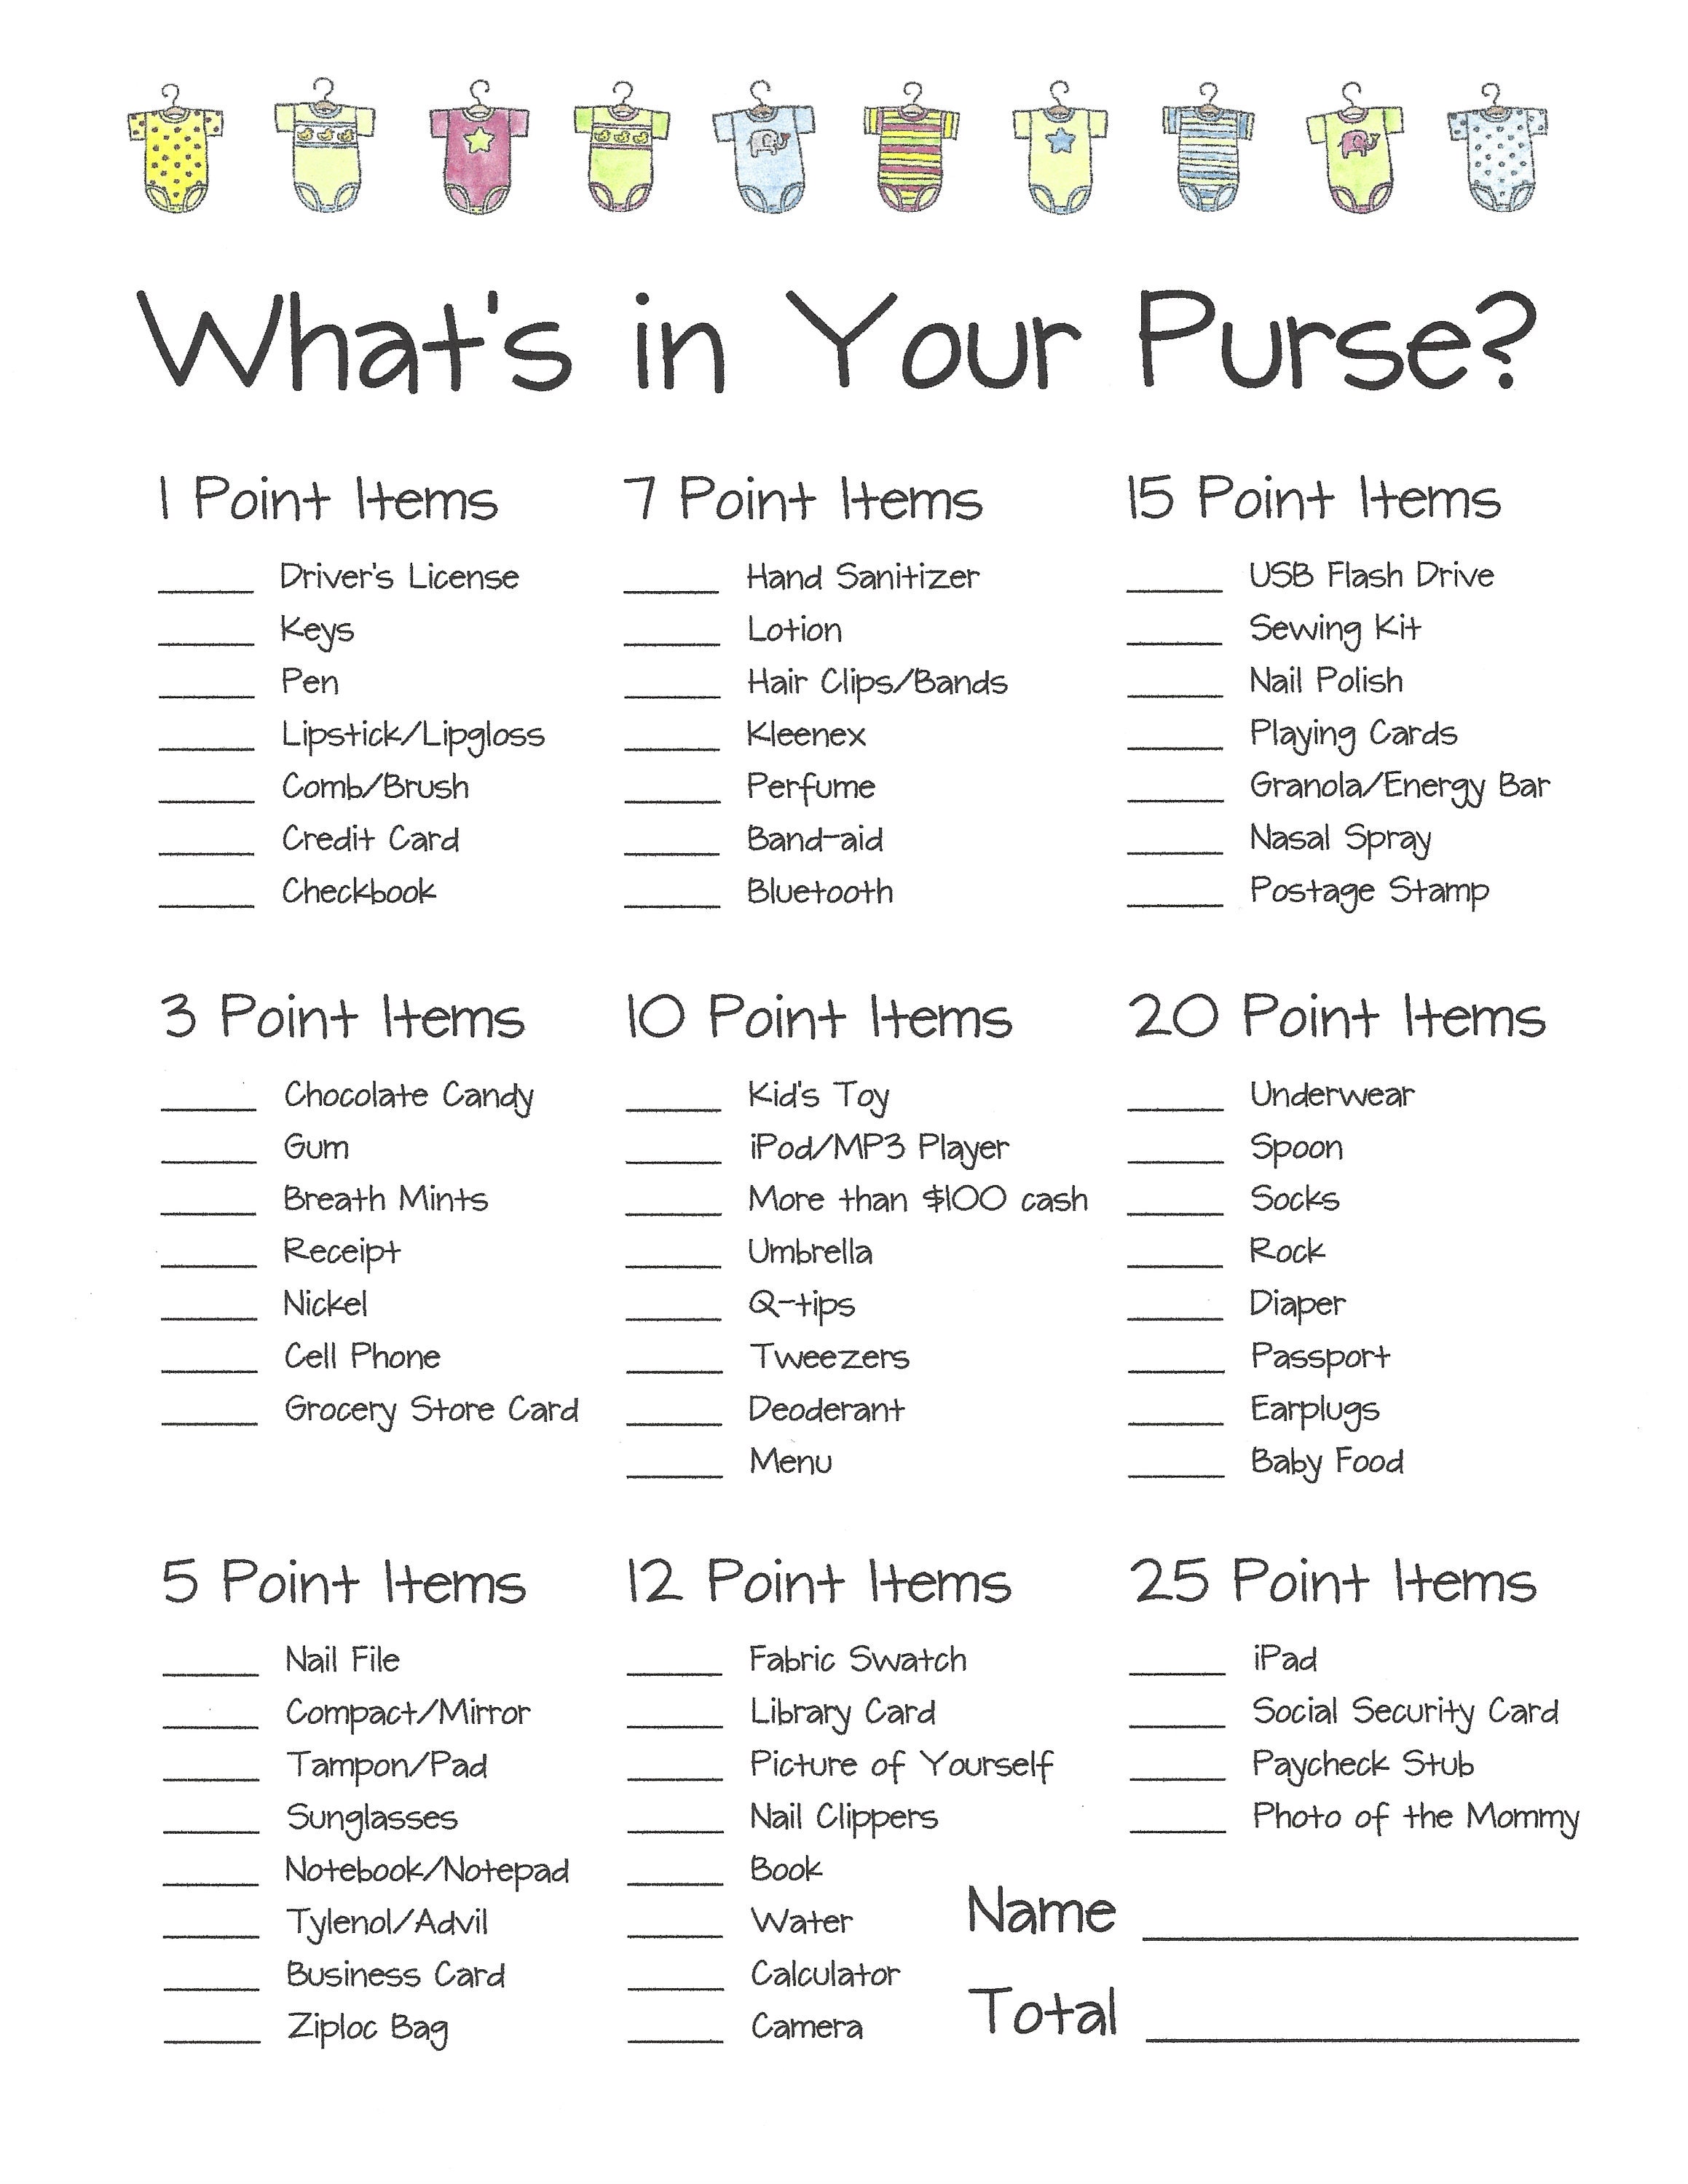 100 Things To Put In Your Purse: Your Ultimate Guide!